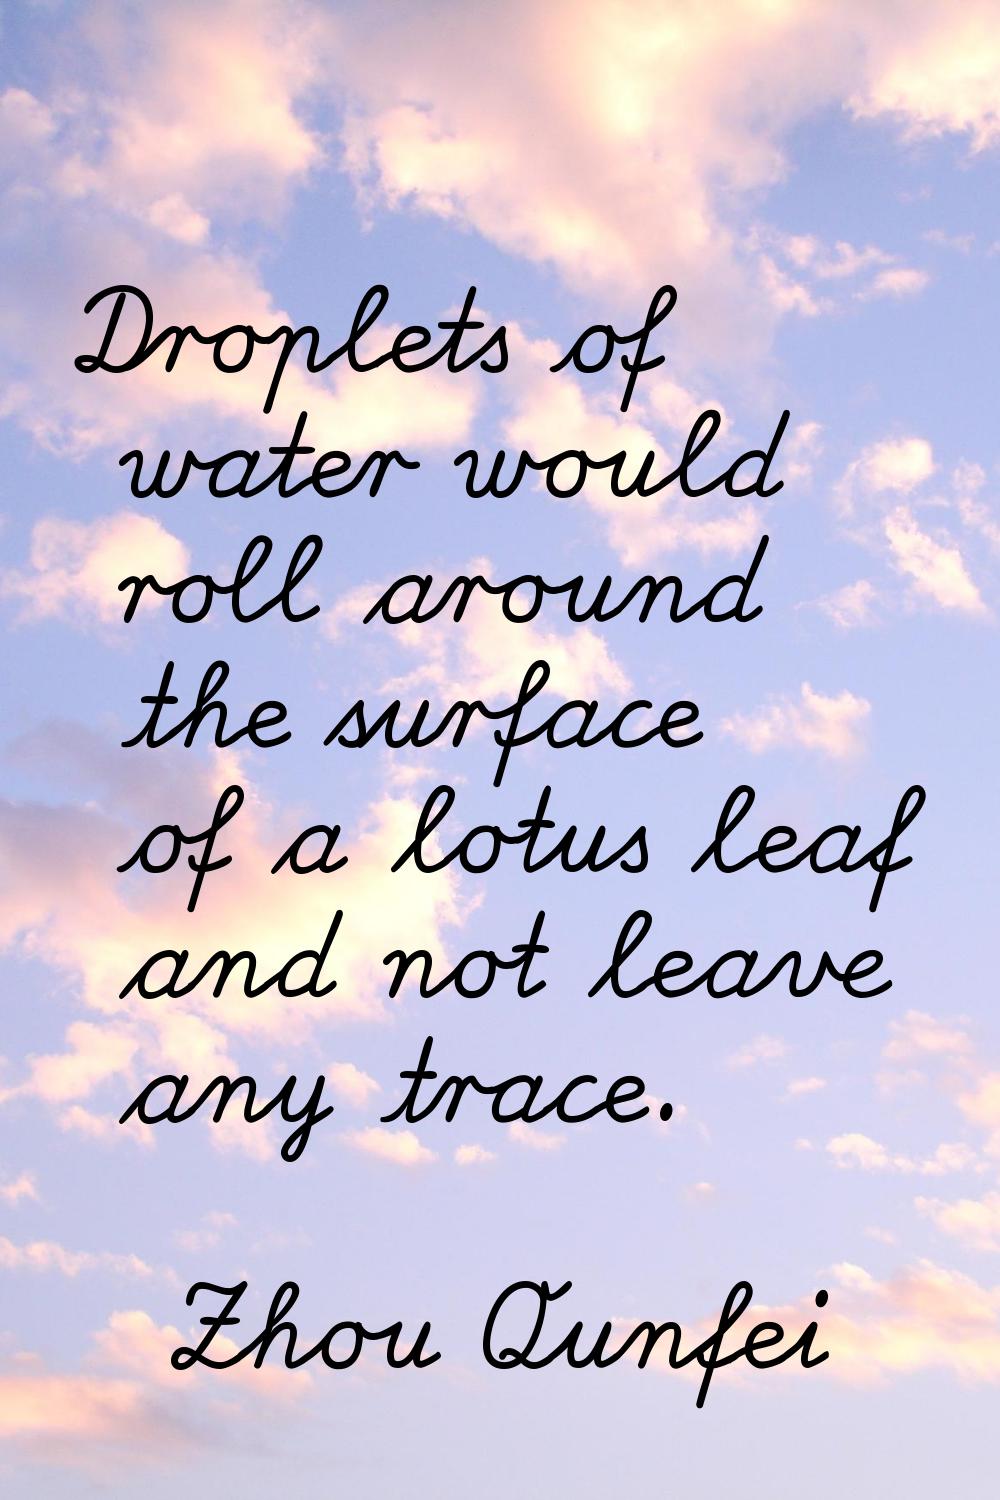 Droplets of water would roll around the surface of a lotus leaf and not leave any trace.